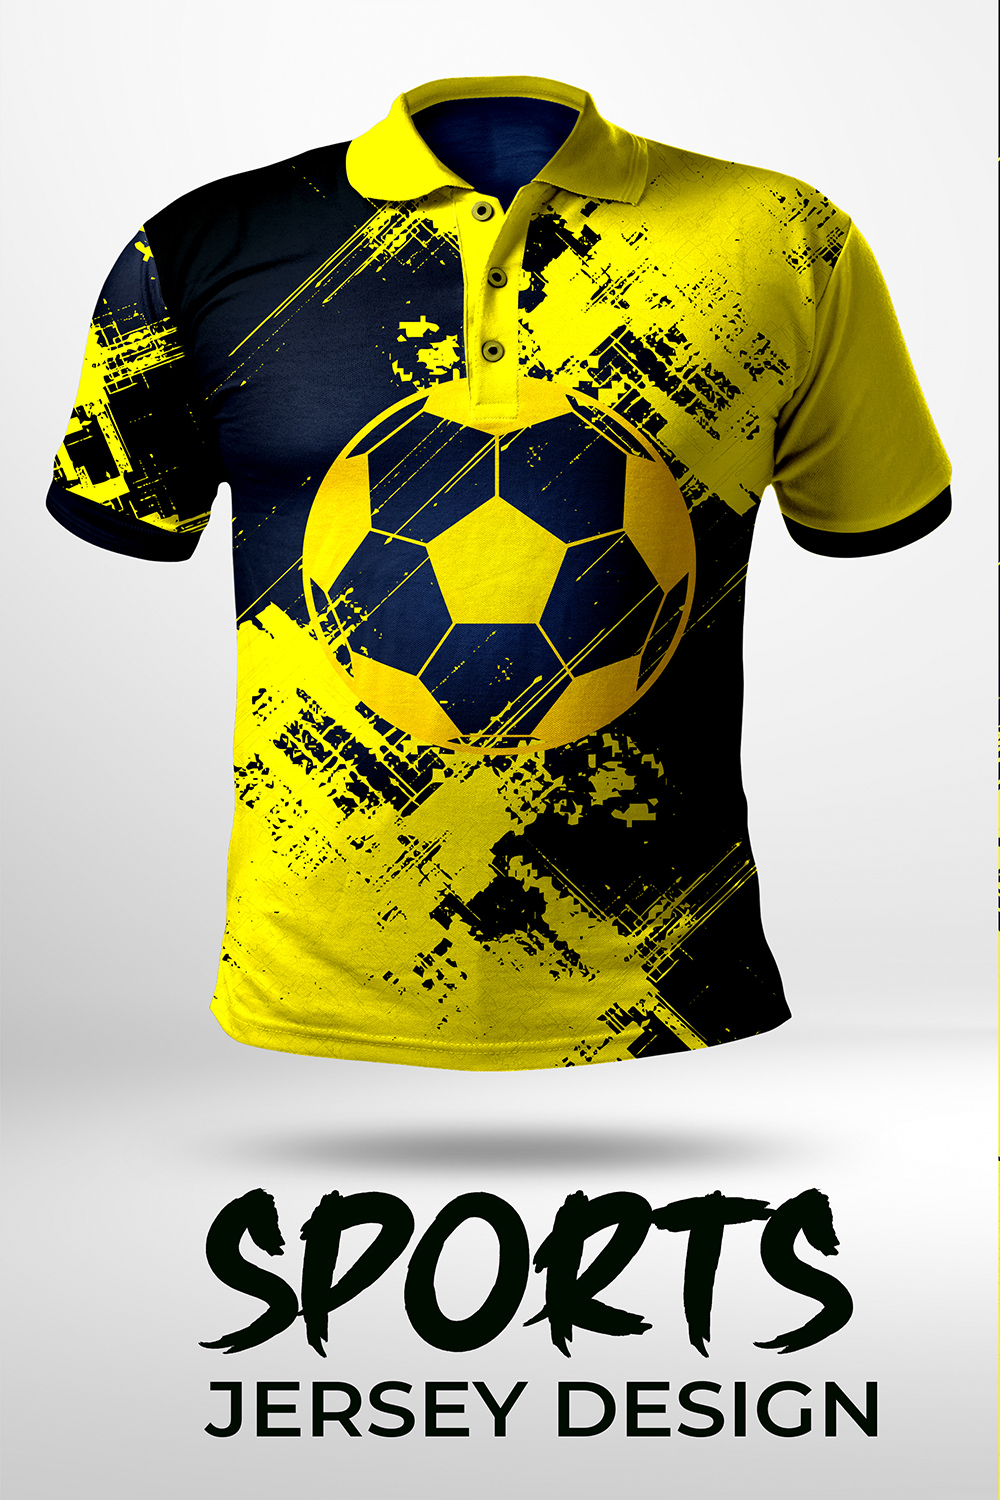 Yellow Jersey Vector Design Images, Black And White Yellow Patterned Jersey  Illustration Design, Jersey Black Design, Jersey Design, Black And Yellow  Jersey PNG Image For Free Download